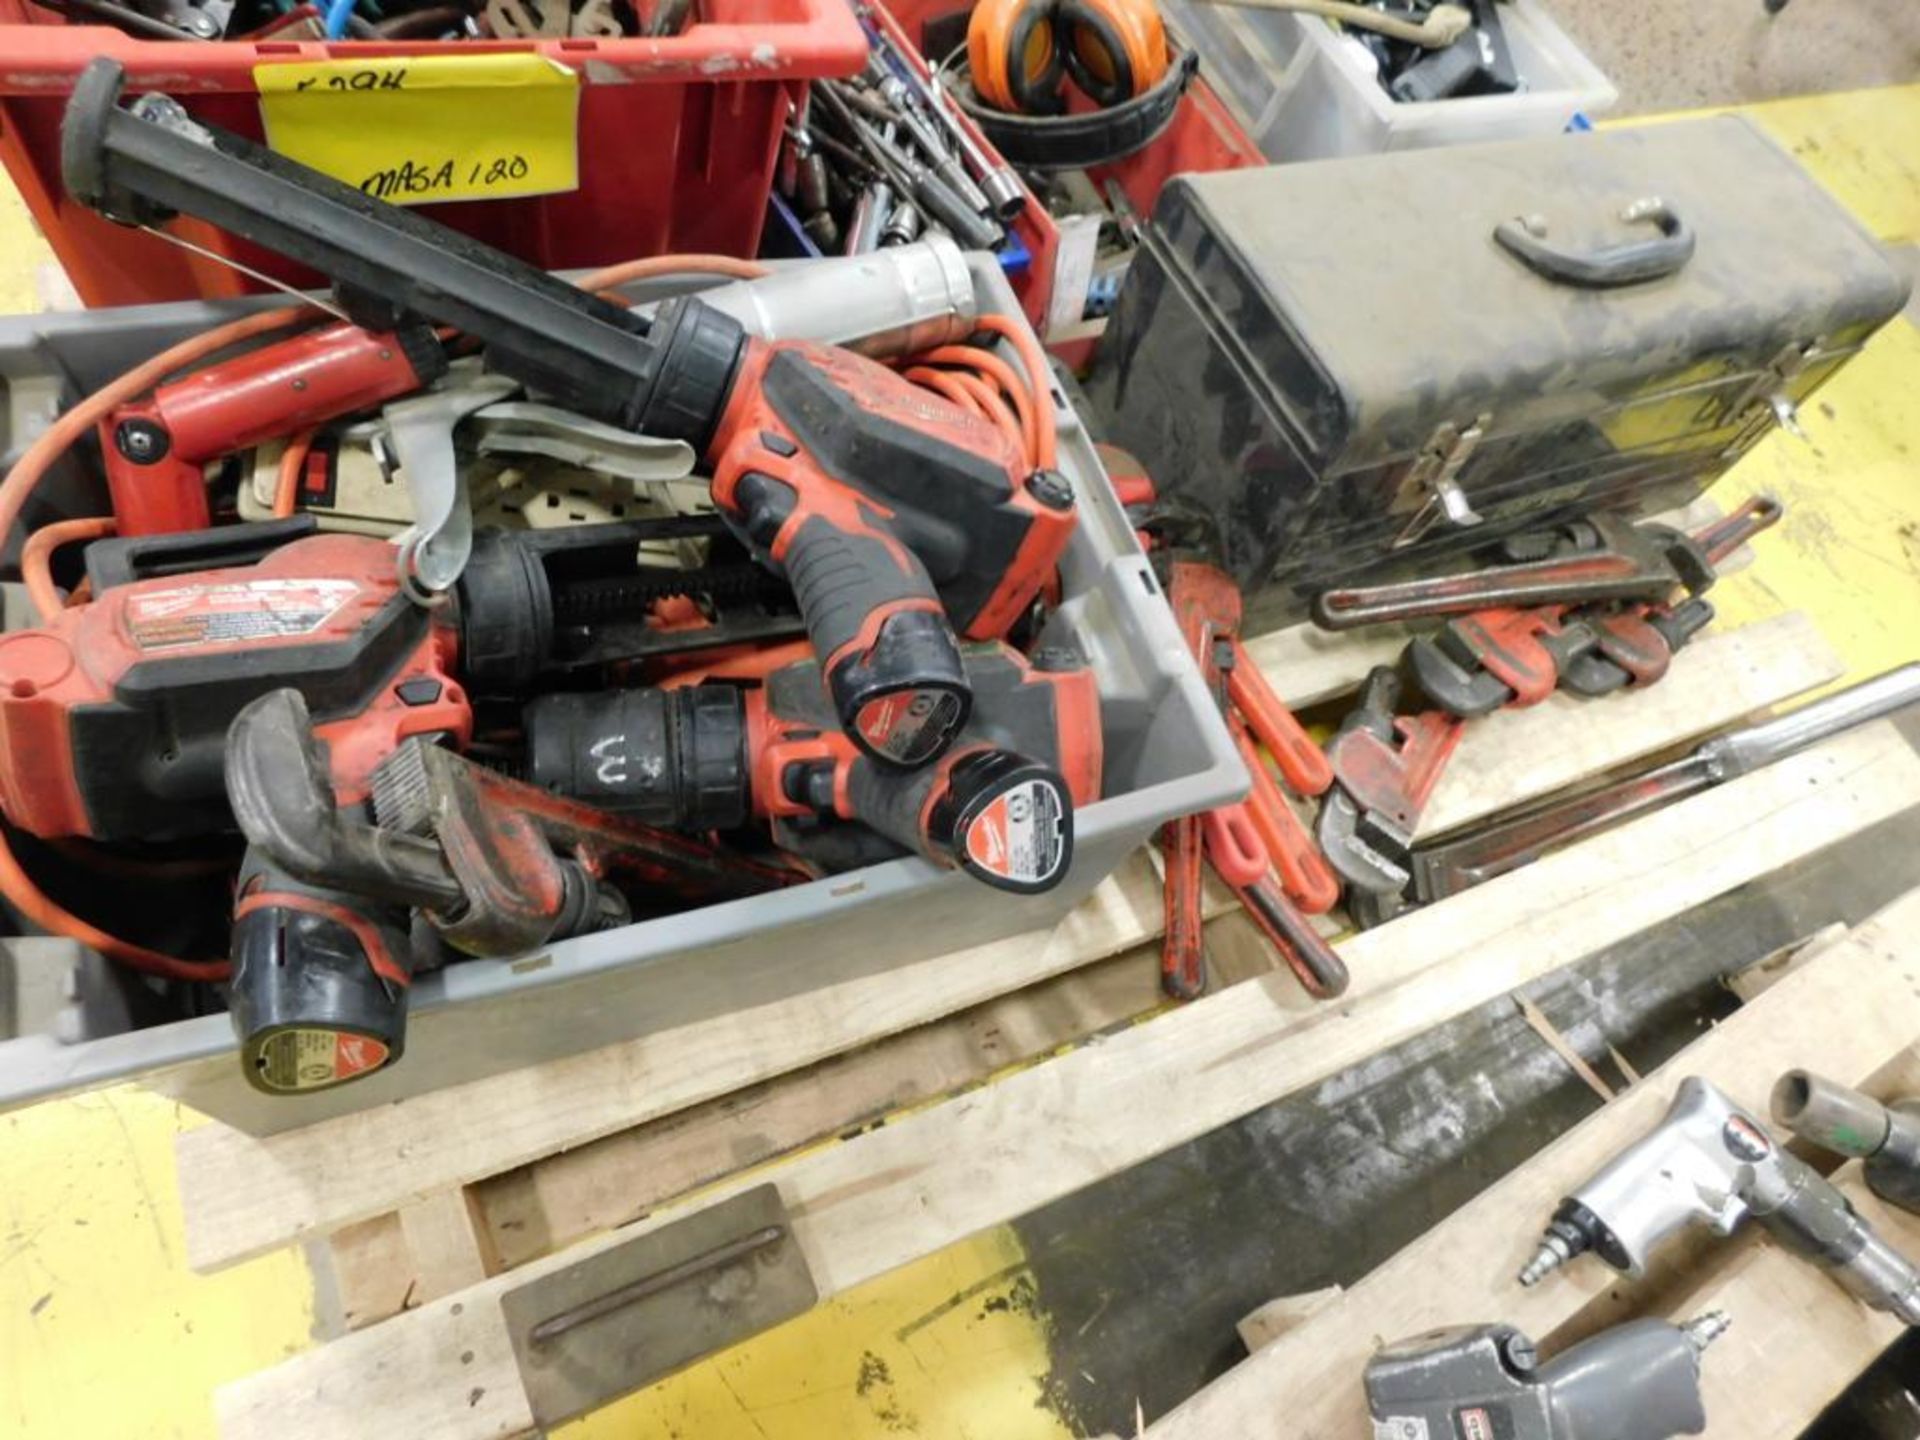 LOT CONSISTING OF: hand tools, pipe wrenches, cordless caulk guns, assorted (one pallet) - Image 2 of 2